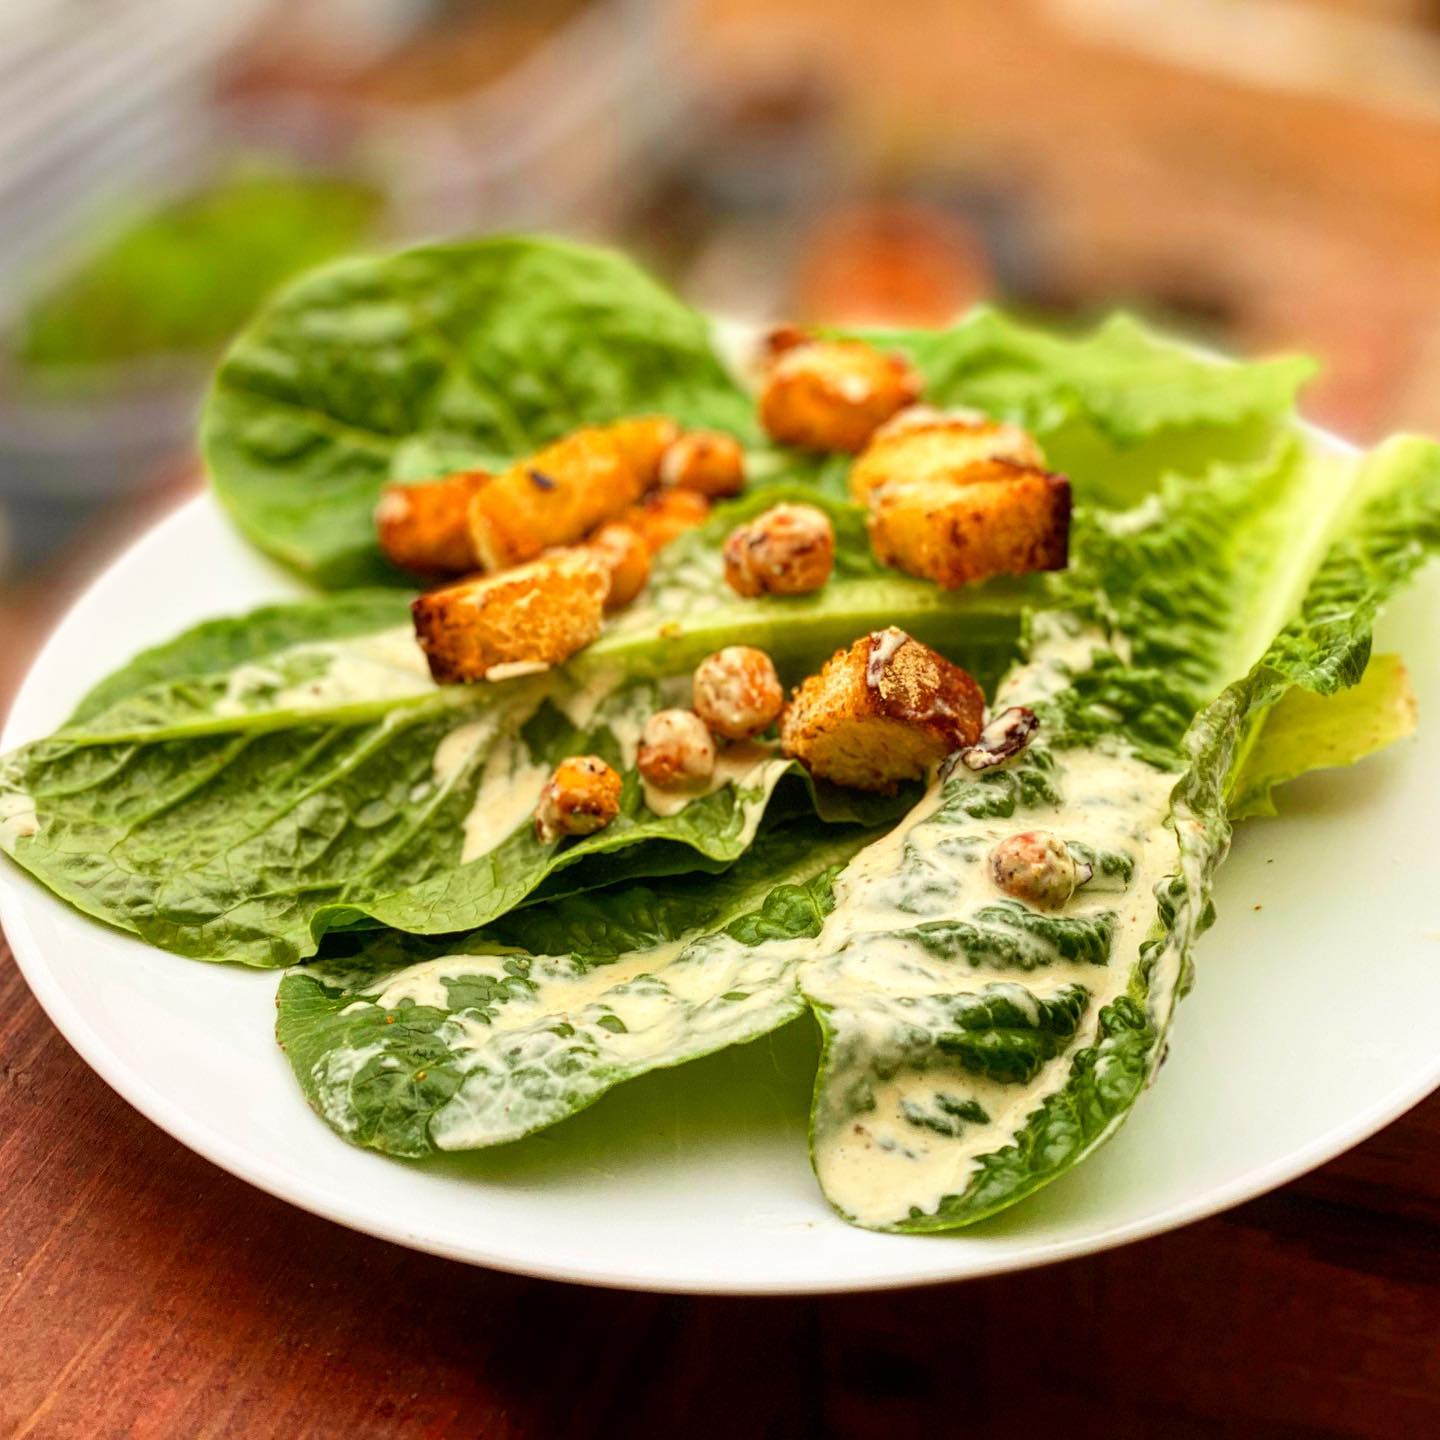 Featured image for “Caesar Salad with Capers and Crispy Chickpea Croutons”